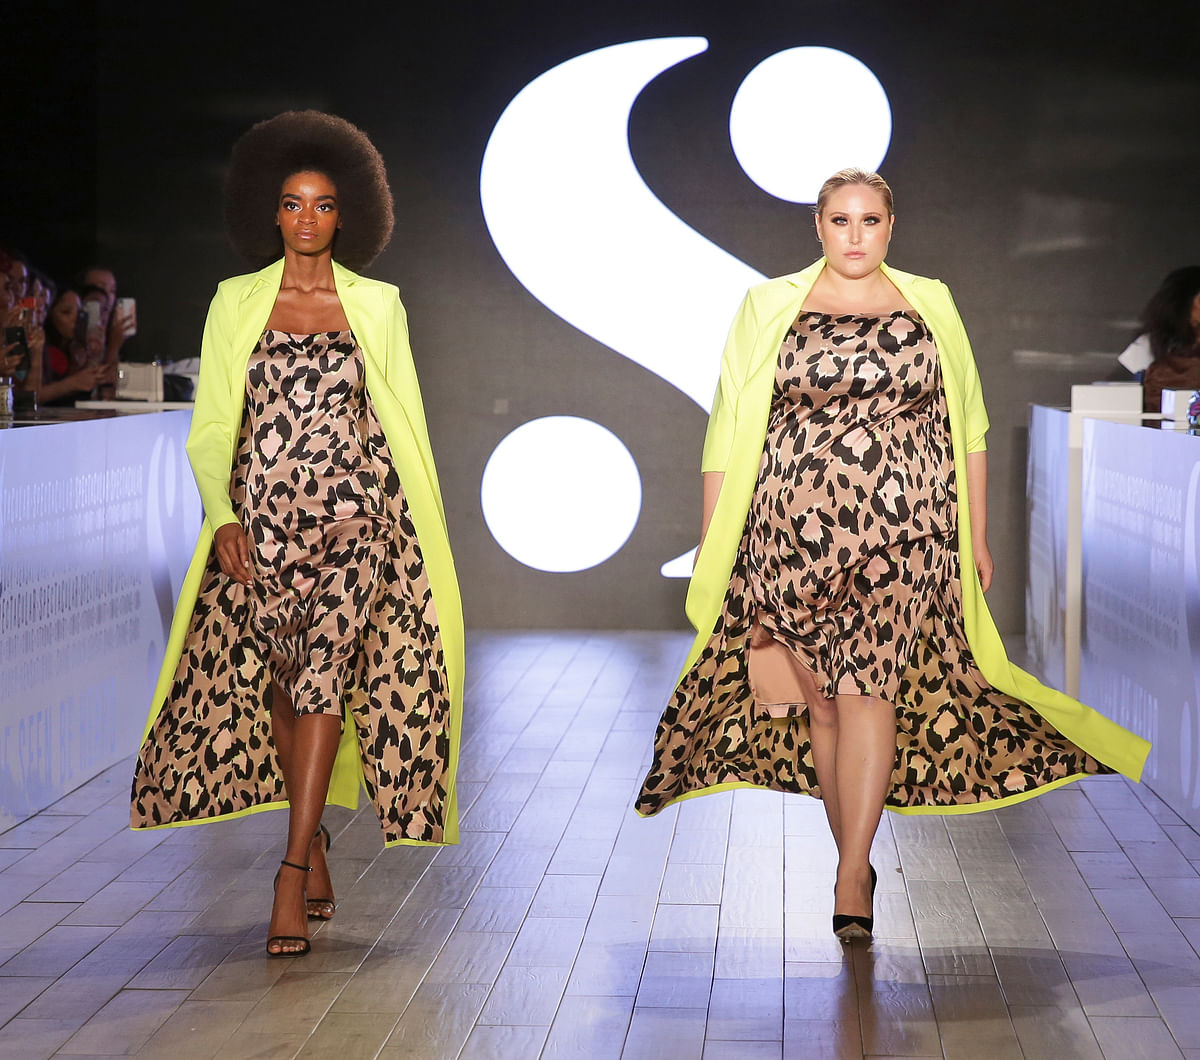 Serena Williams presented the latest collection of her fashion label, S by Serena at the New York Fashion Week.